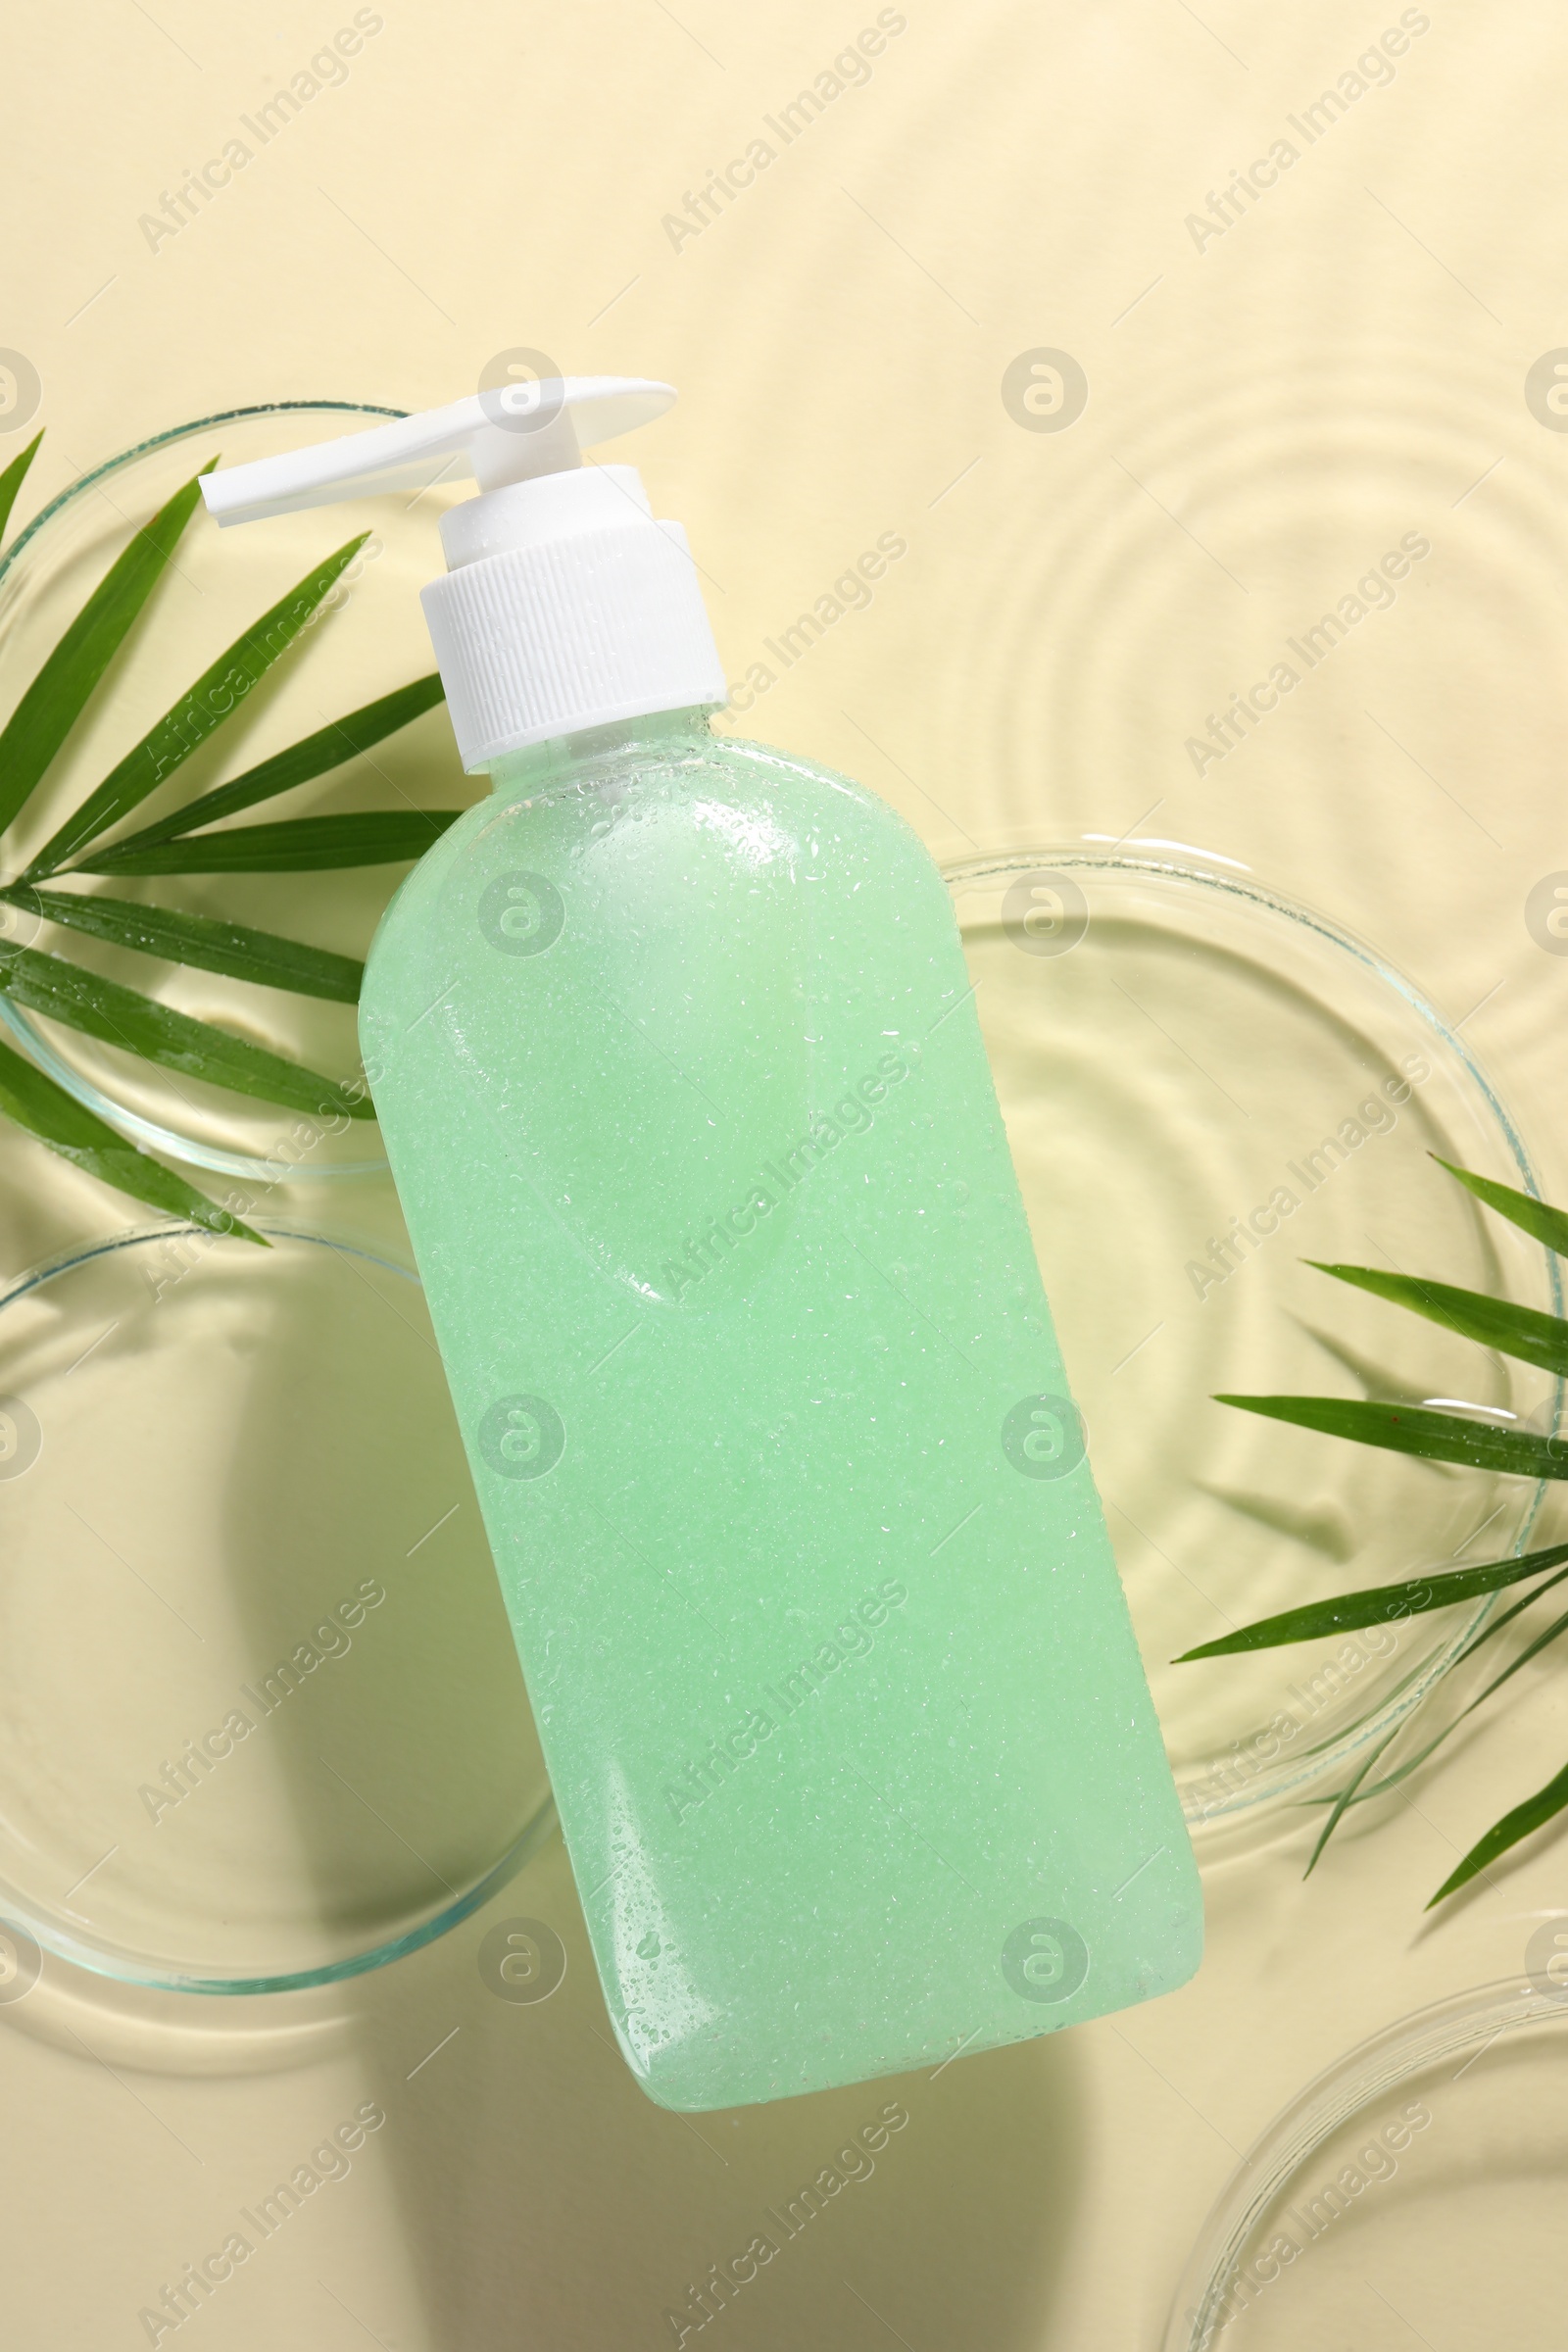 Photo of Bottle of face cleansing product, fresh leaves and petri dishes in water against beige background, flat lay